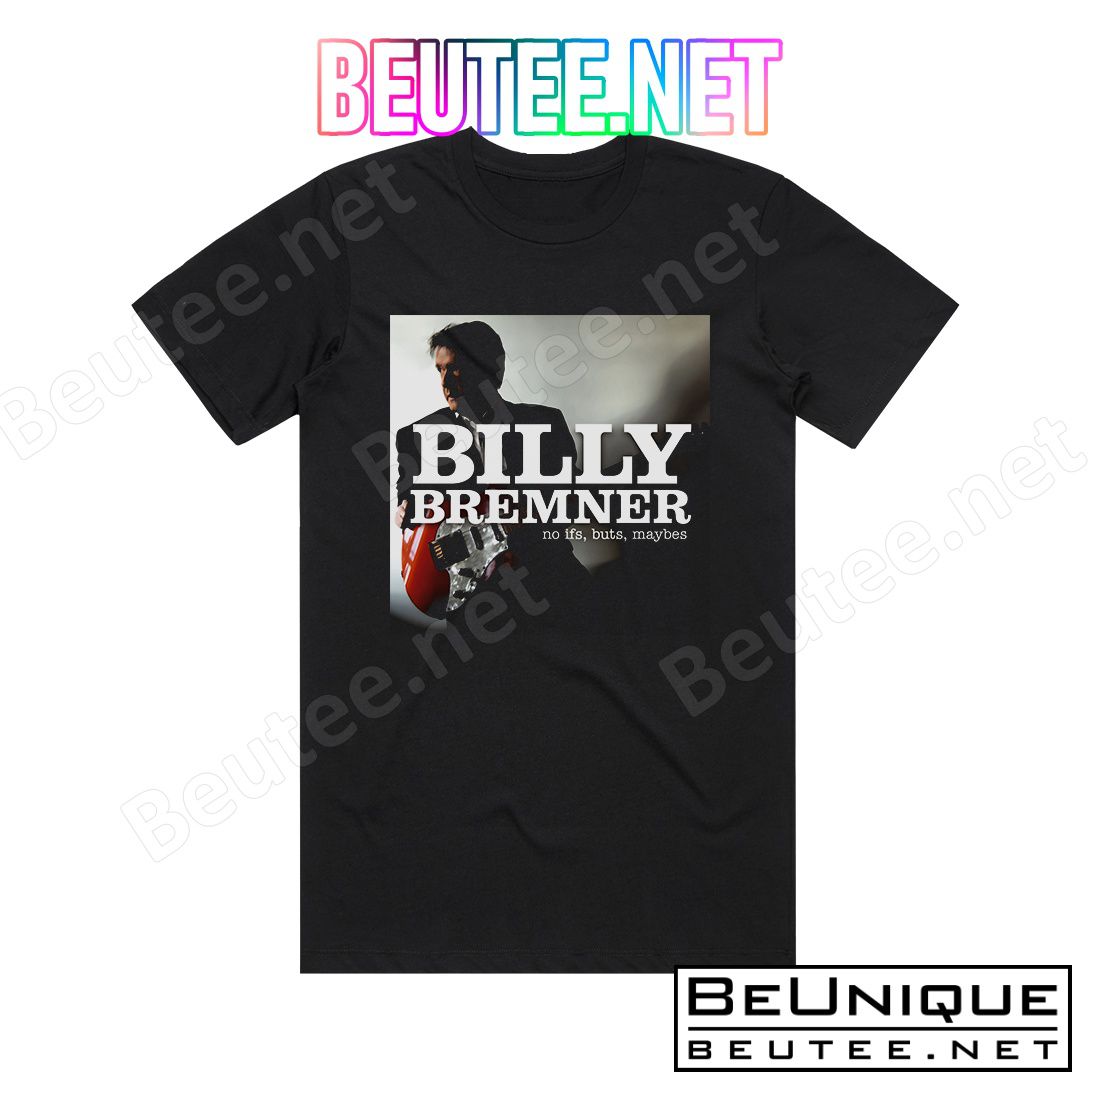 Billy Bremner No Ifs Buts Maybes Album Cover T-Shirt